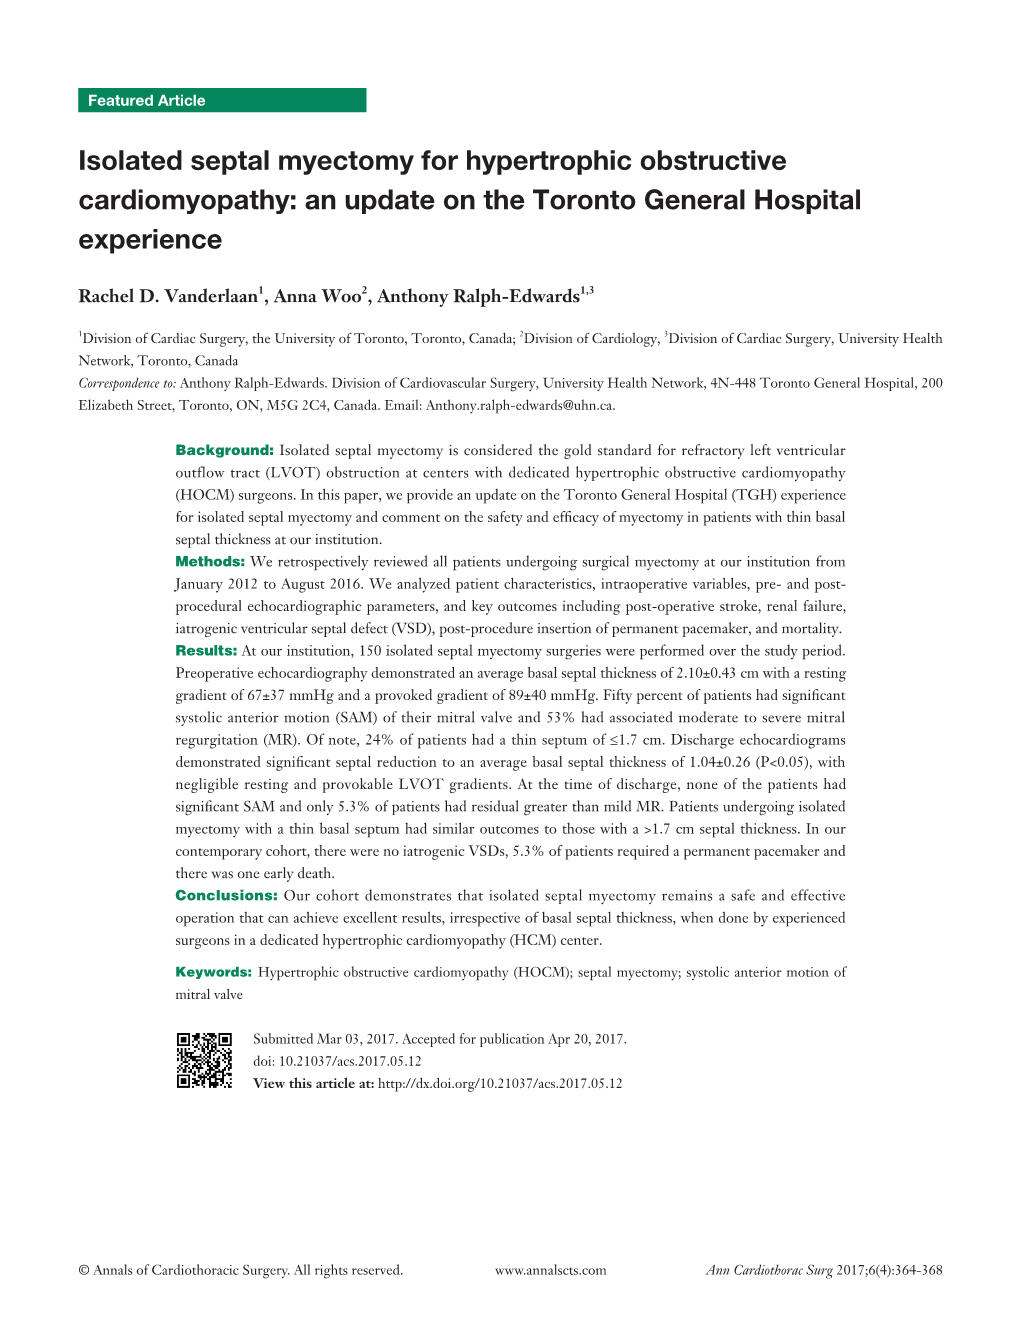 Isolated Septal Myectomy for Hypertrophic Obstructive Cardiomyopathy: an Update on the Toronto General Hospital Experience